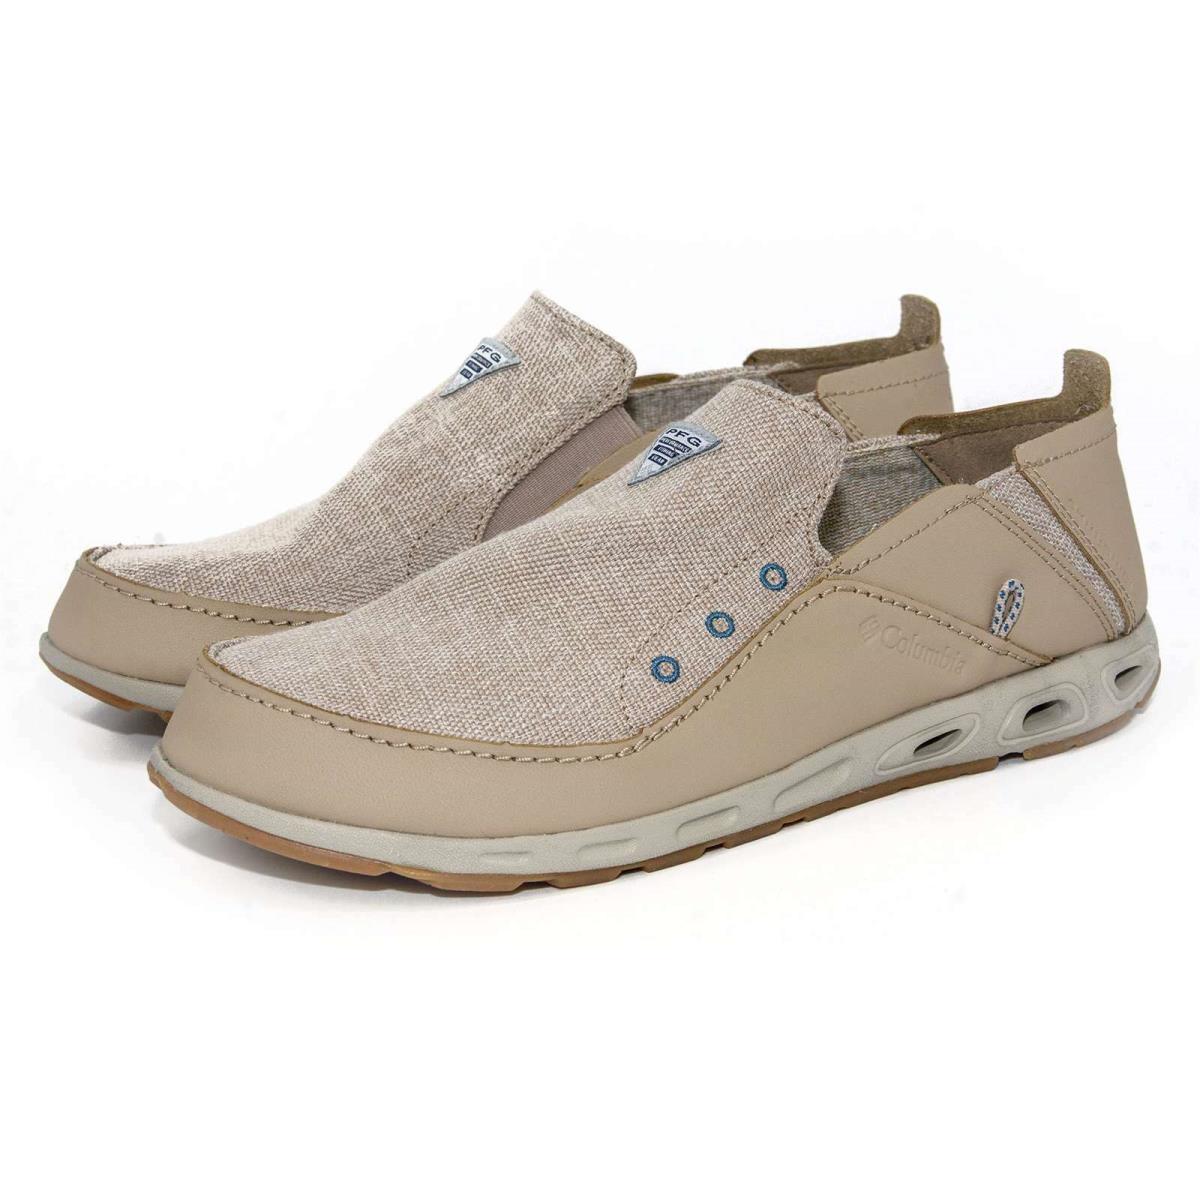 Columbia Men`s Bahama Pfg Series Water Boat Shoes Wide Width Slip On Shoes Ancient Fossil / Steel